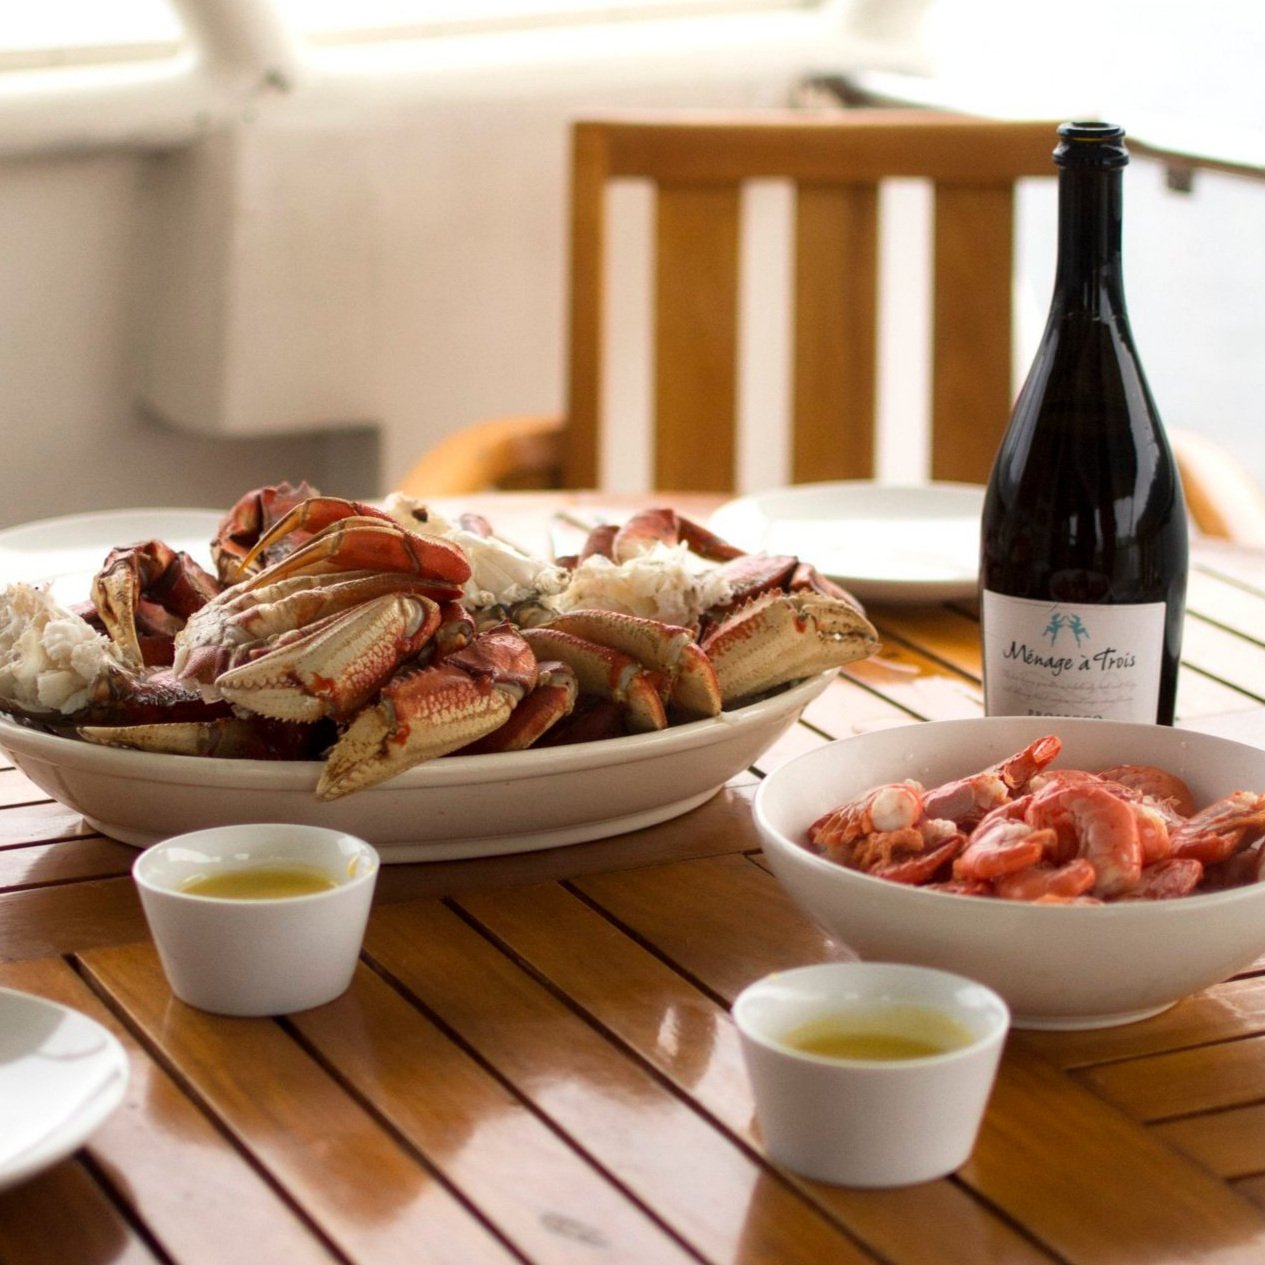 A table setting with platters full of Dungeness crab and prawns, with a bottle of wine and small dishes of melted butter.